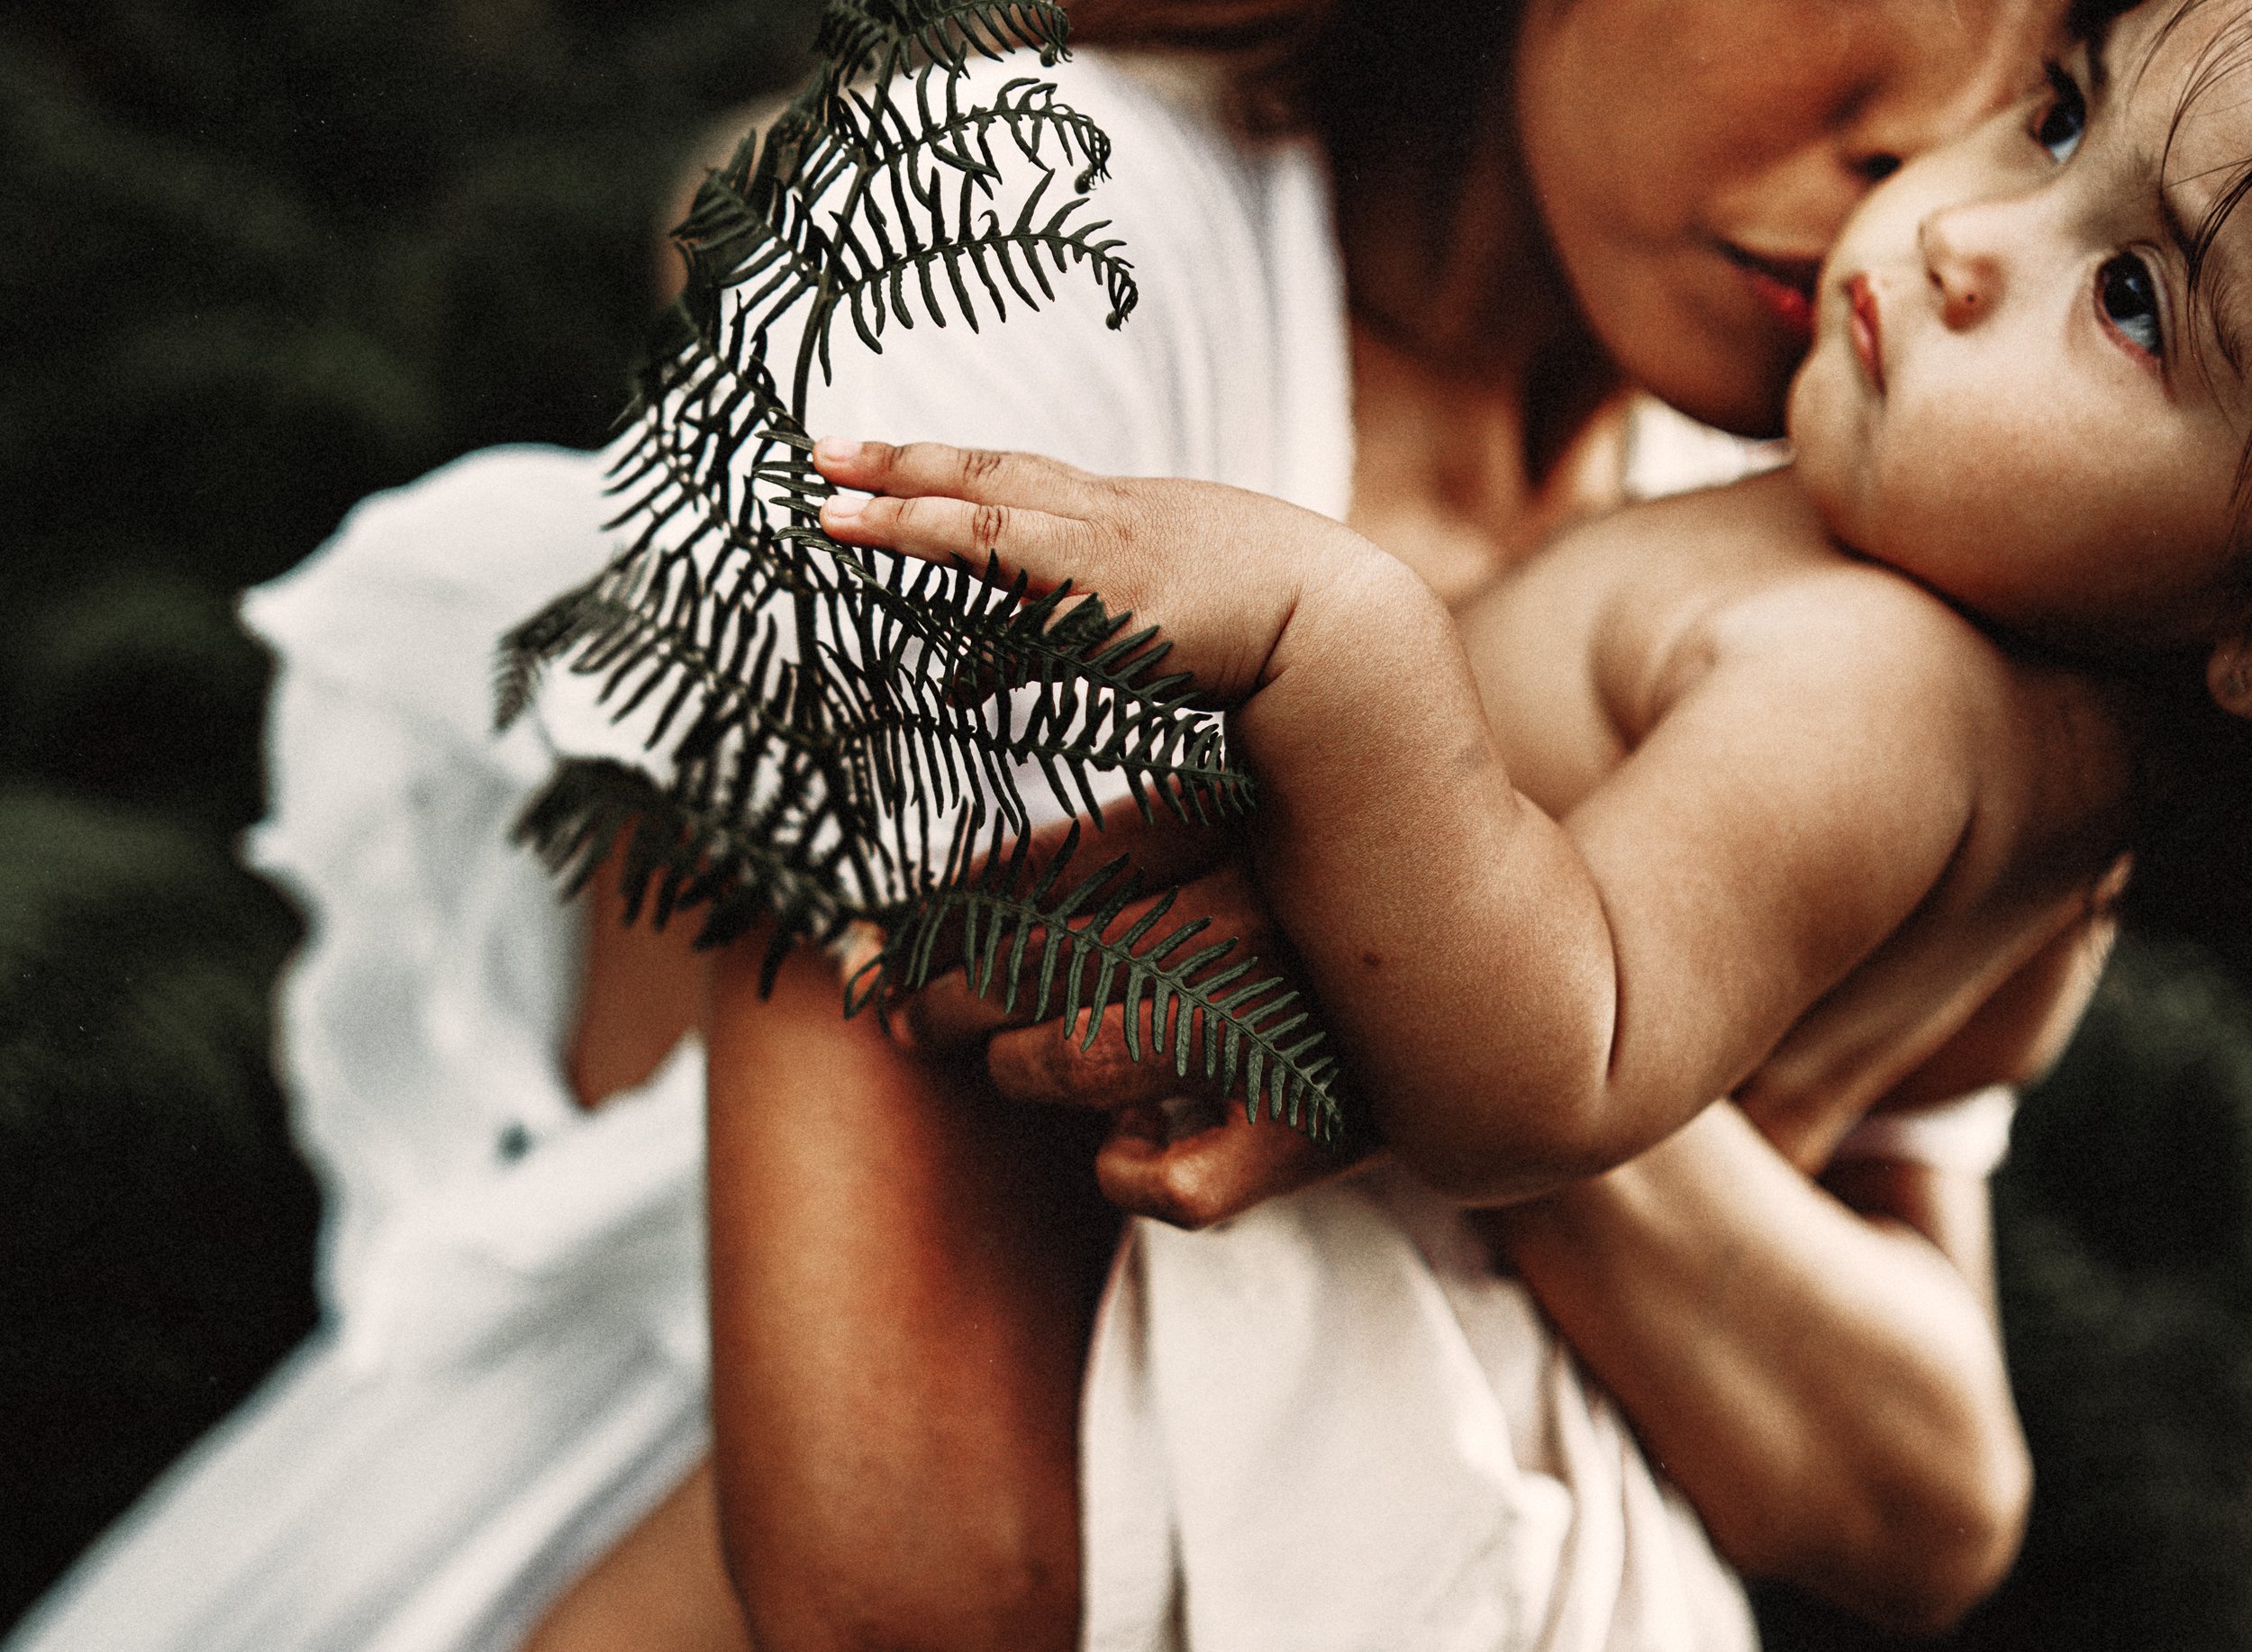 emotive-motherhood-photo-session-with-mother-and-daughter-in-a-patch-of-ferns-at-sunset-in-landtuhl-kmc-germany (5).jpg